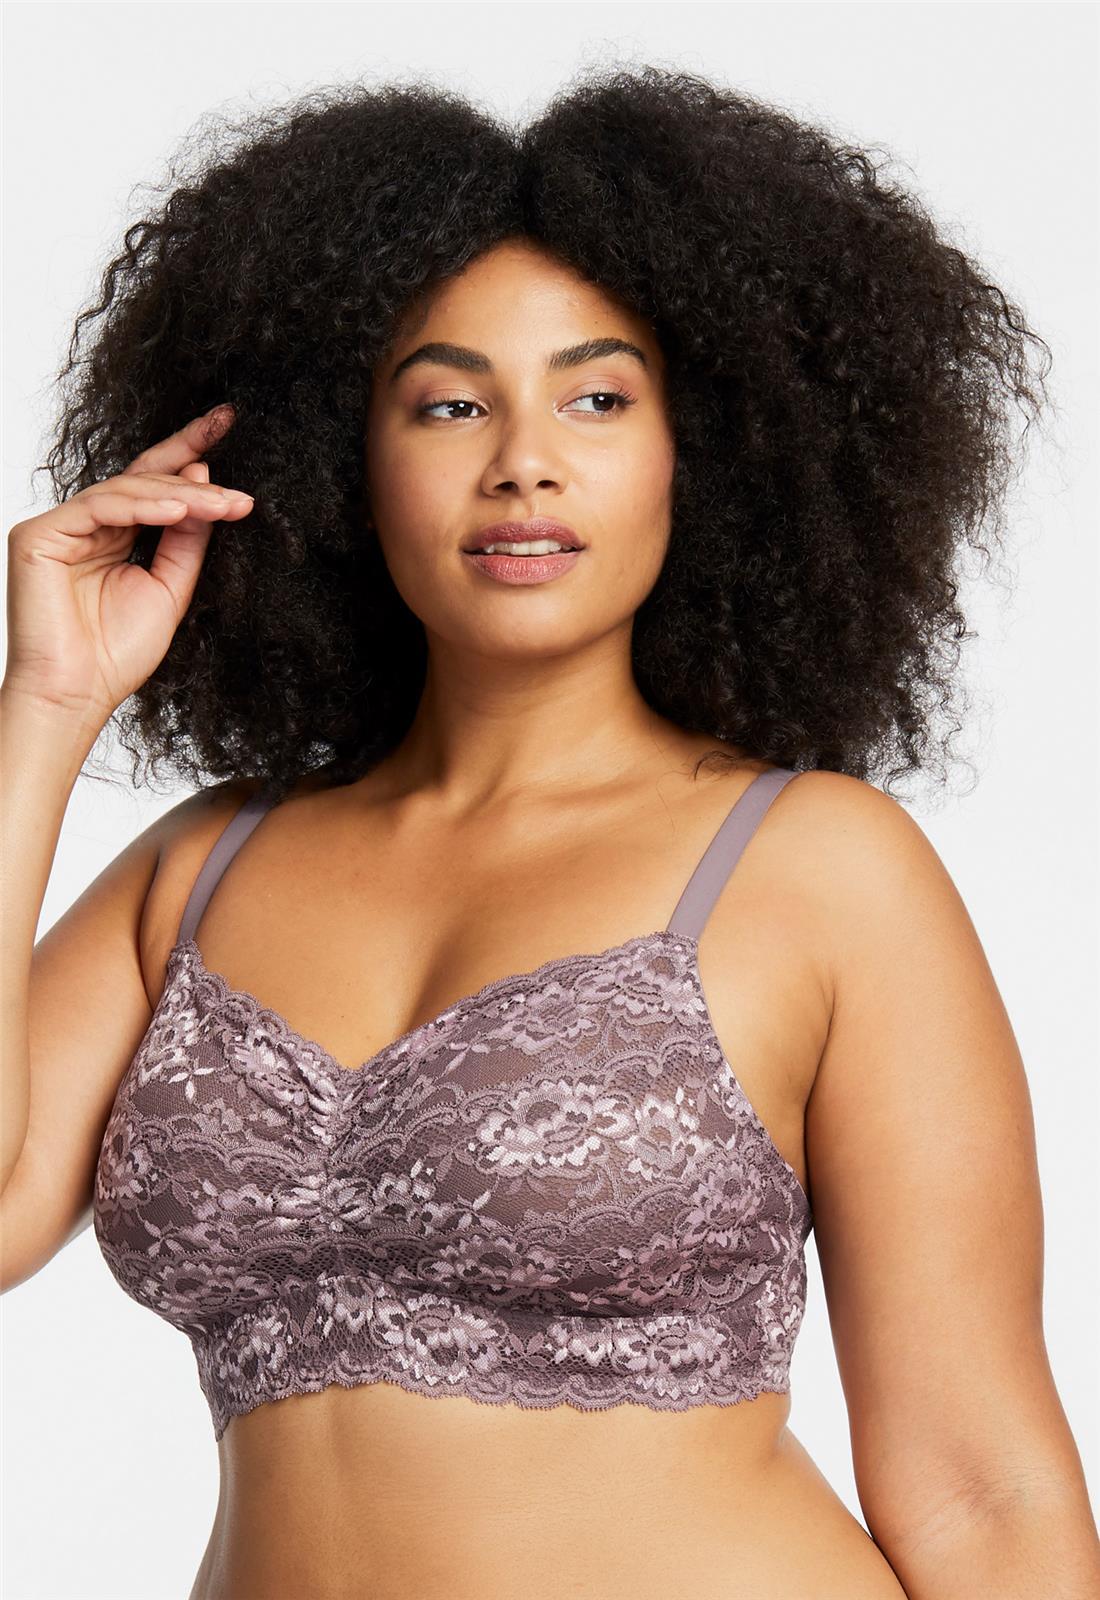 https://www.braboutique.com/wp-content/uploads/2022/05/9334-Bralette-Almond-Spice-Pink-Peral.jpg